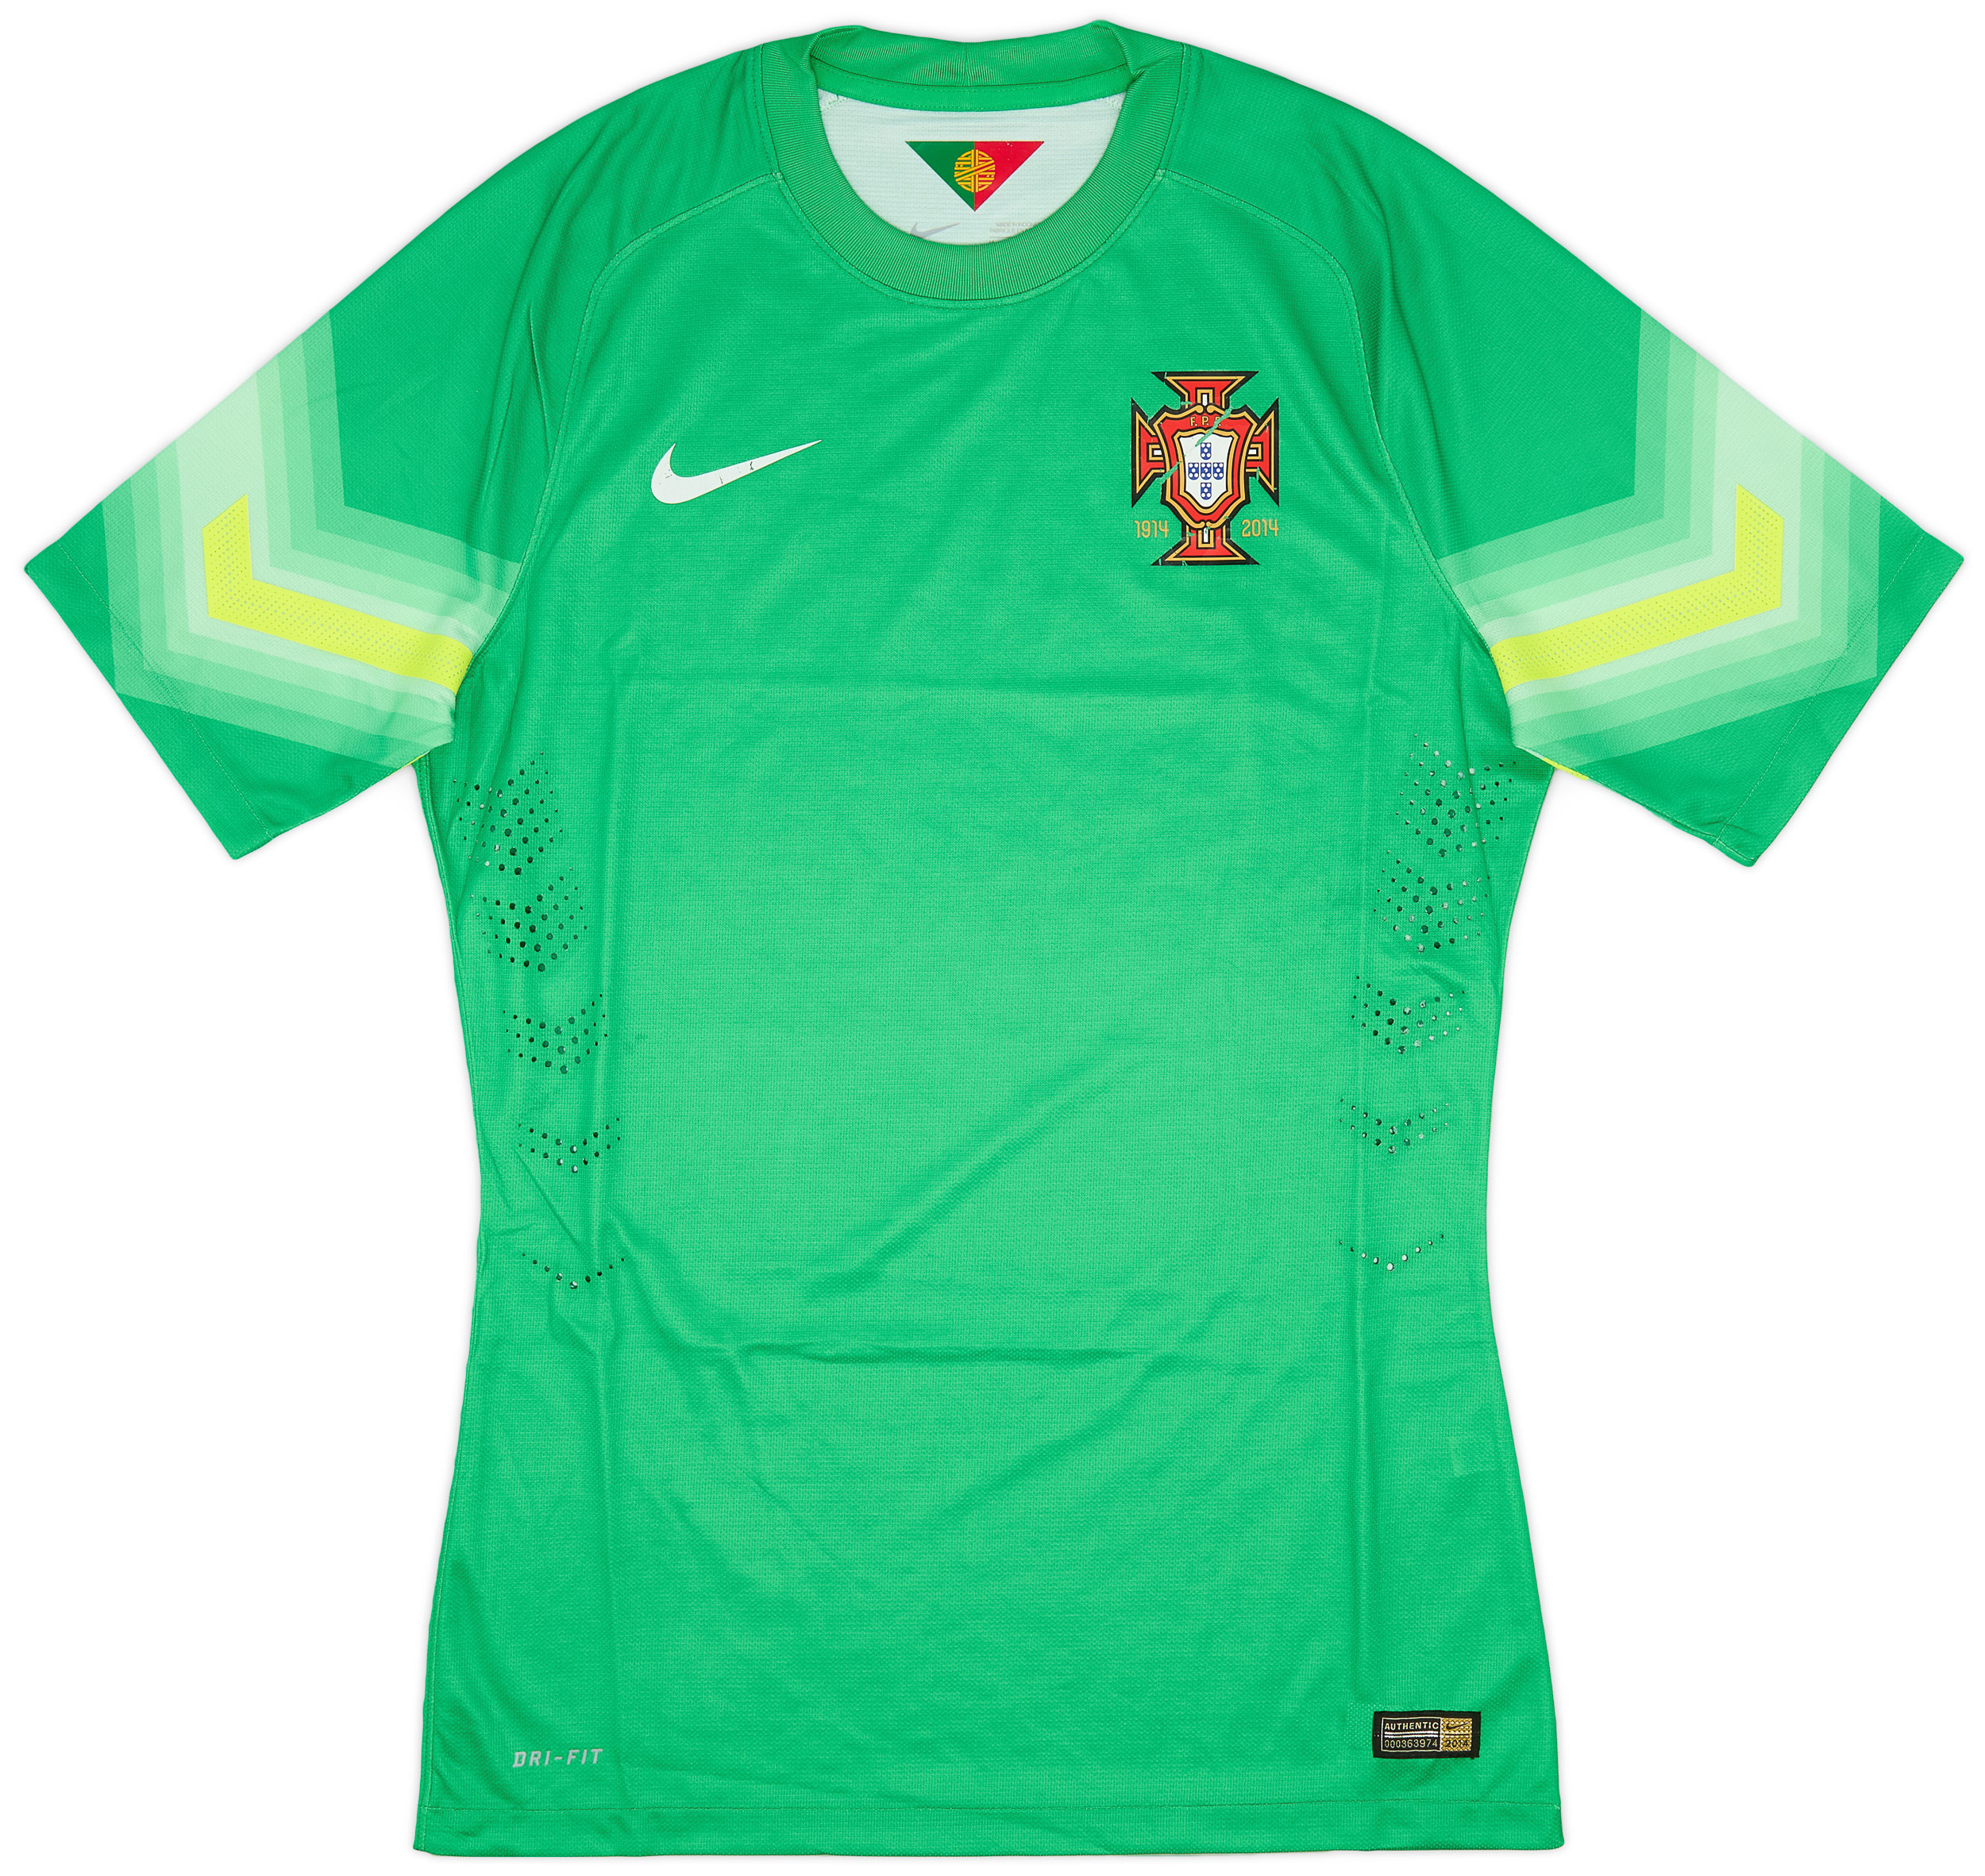 2014-16 Portugal Player Issue GK Shirt - 6/10 - ()